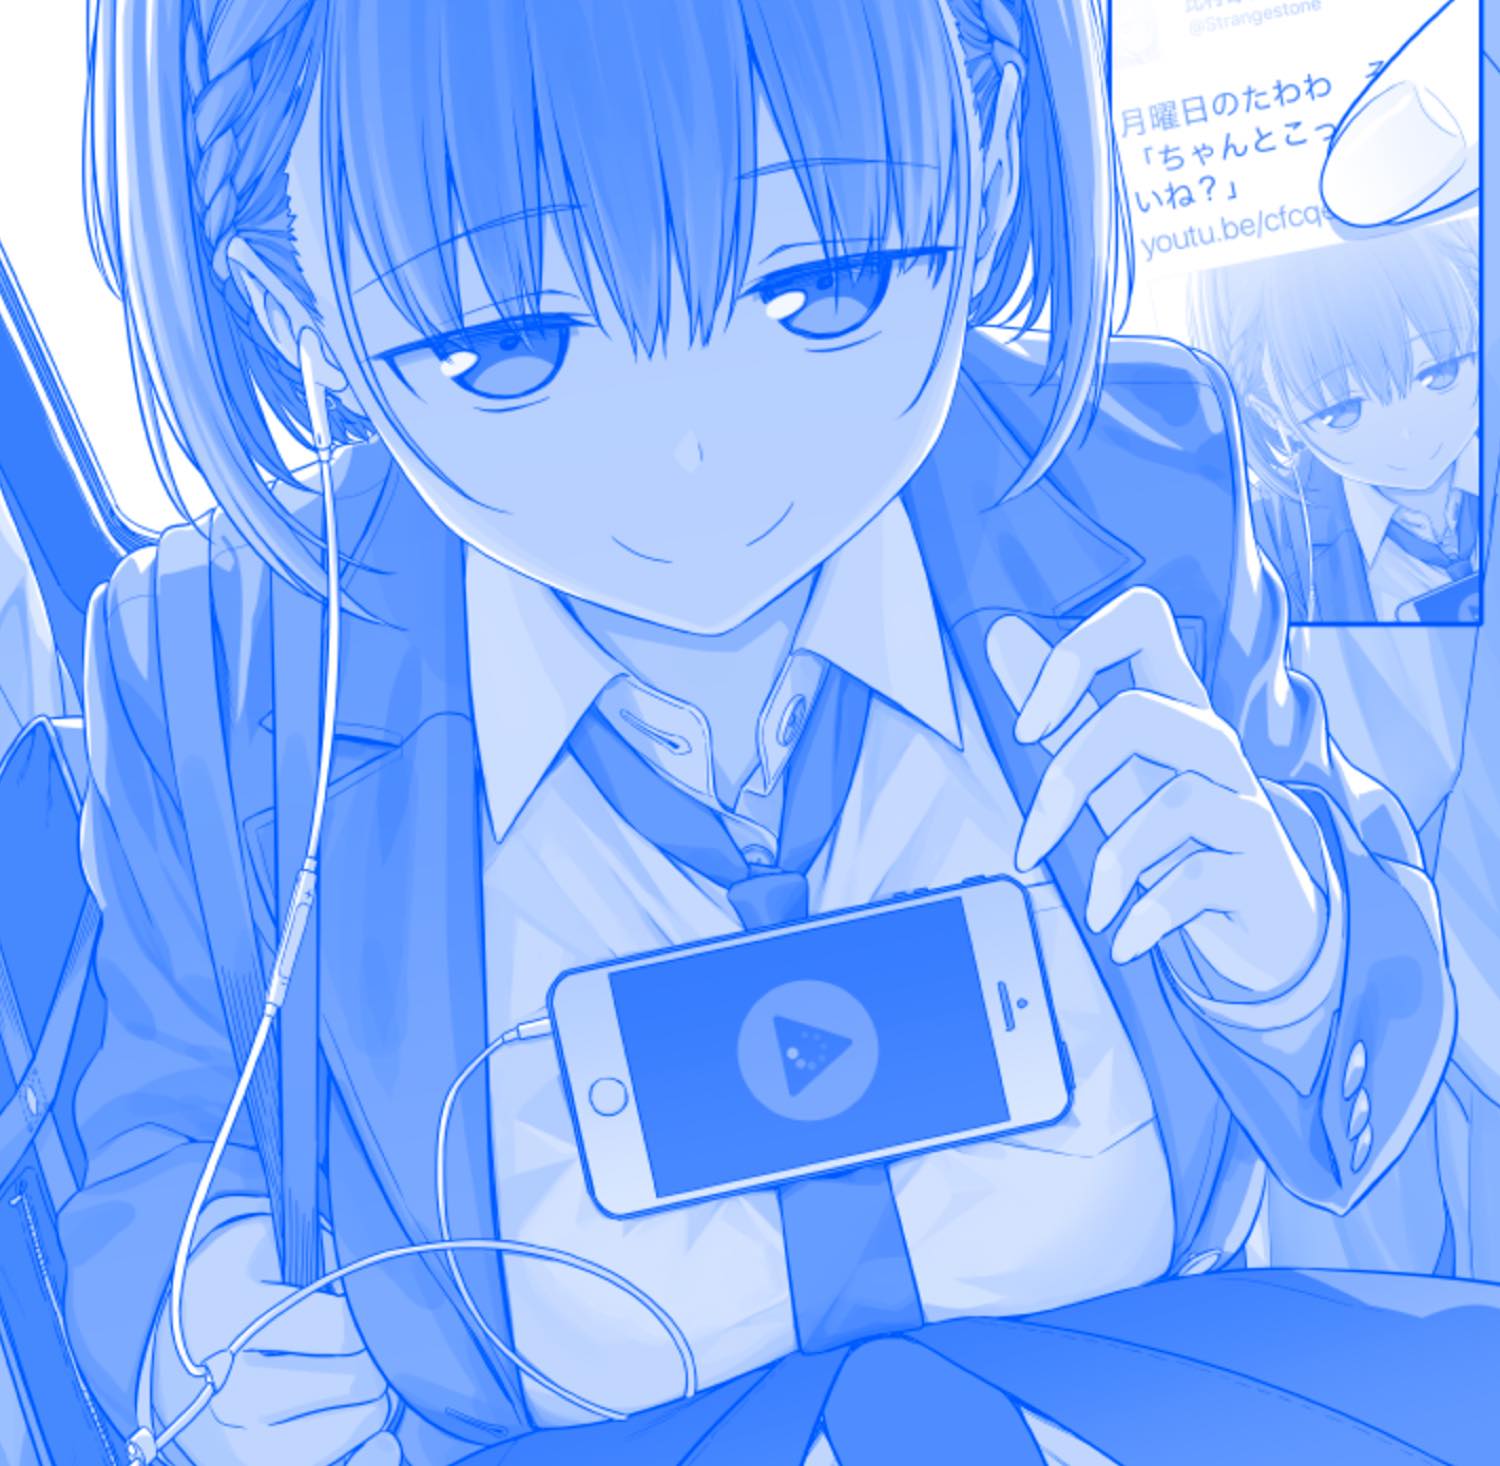 Are You Up to the “Tawawa Challenge”? Balancing Smartphones on Breasts Becomes a Thing